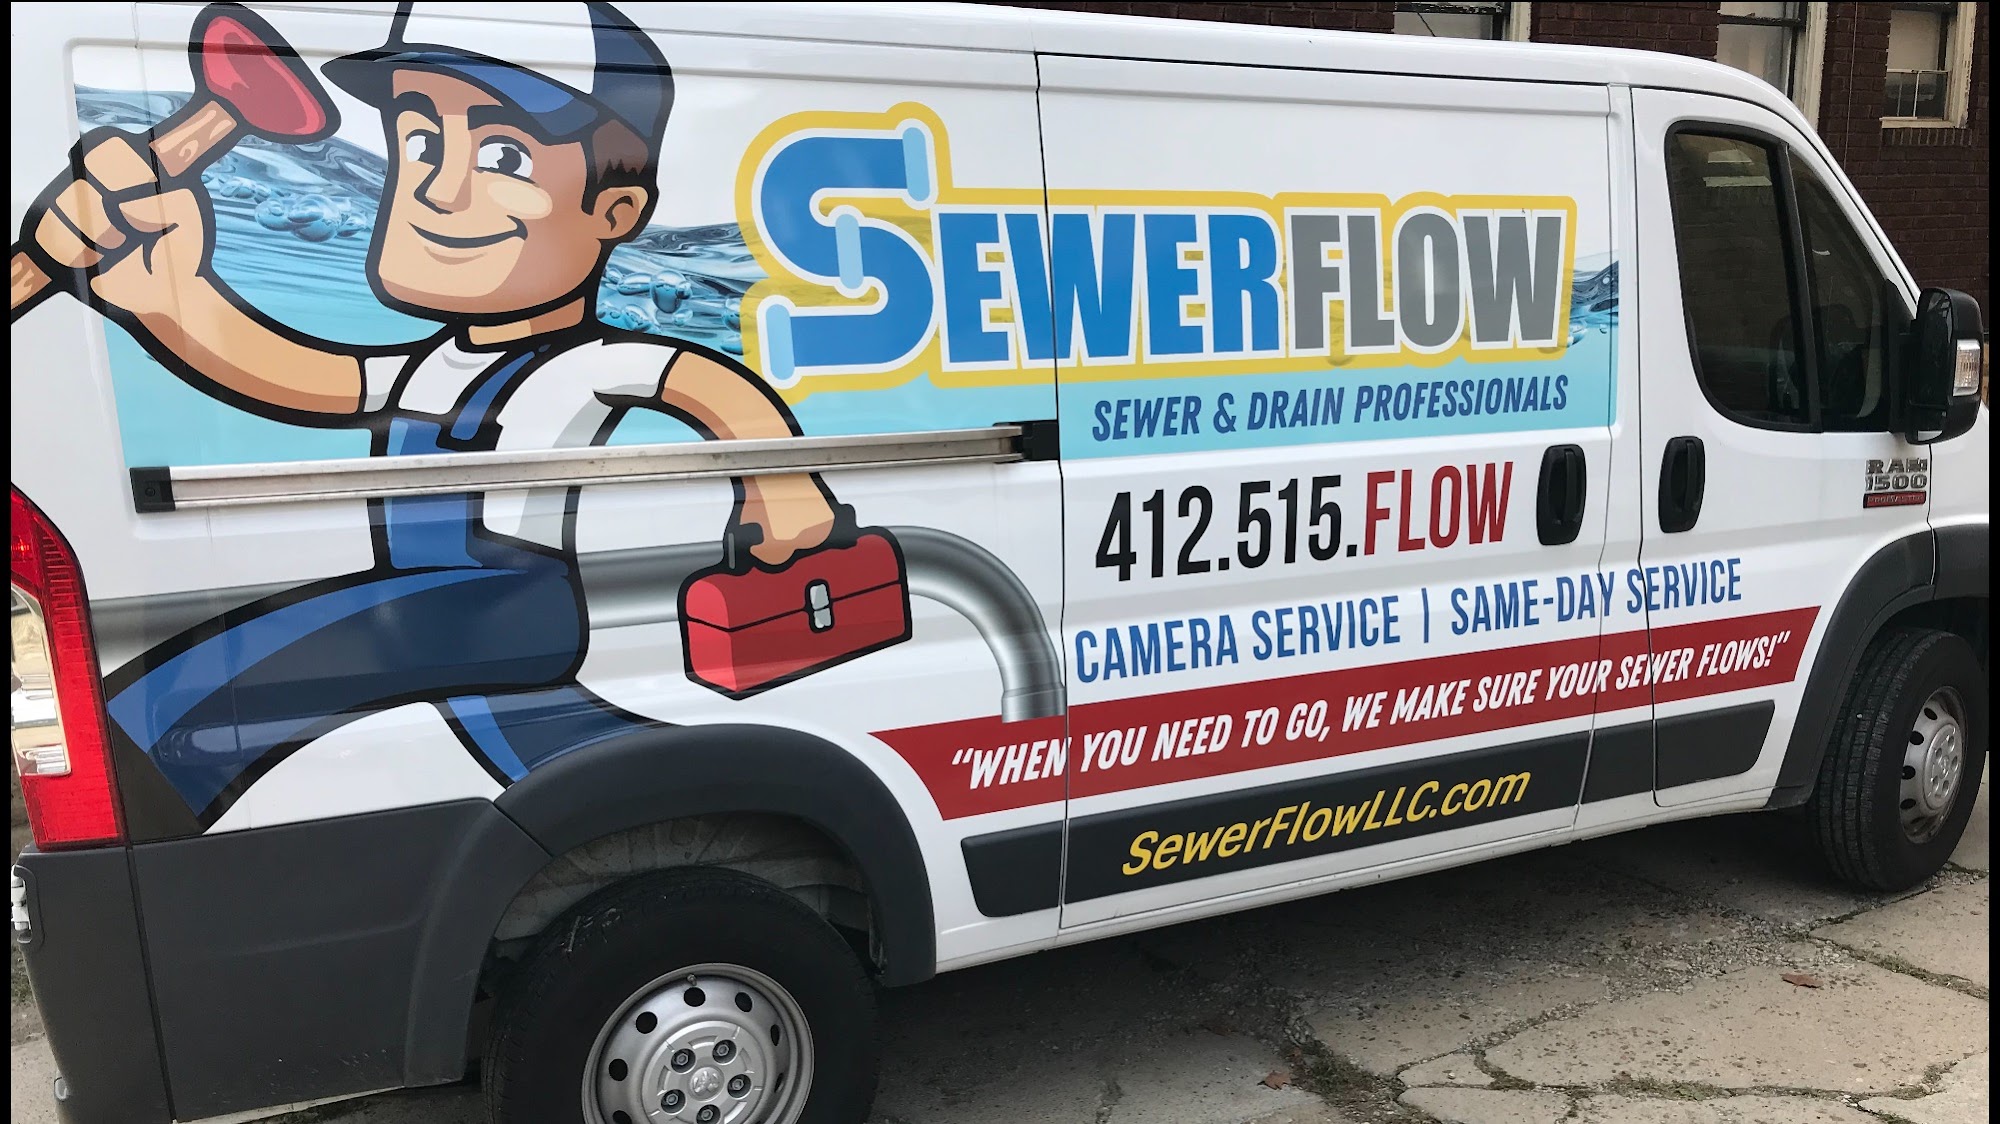 Sewer Flow - Pittsburgh Sewer & Drain Specialists And Plumbing